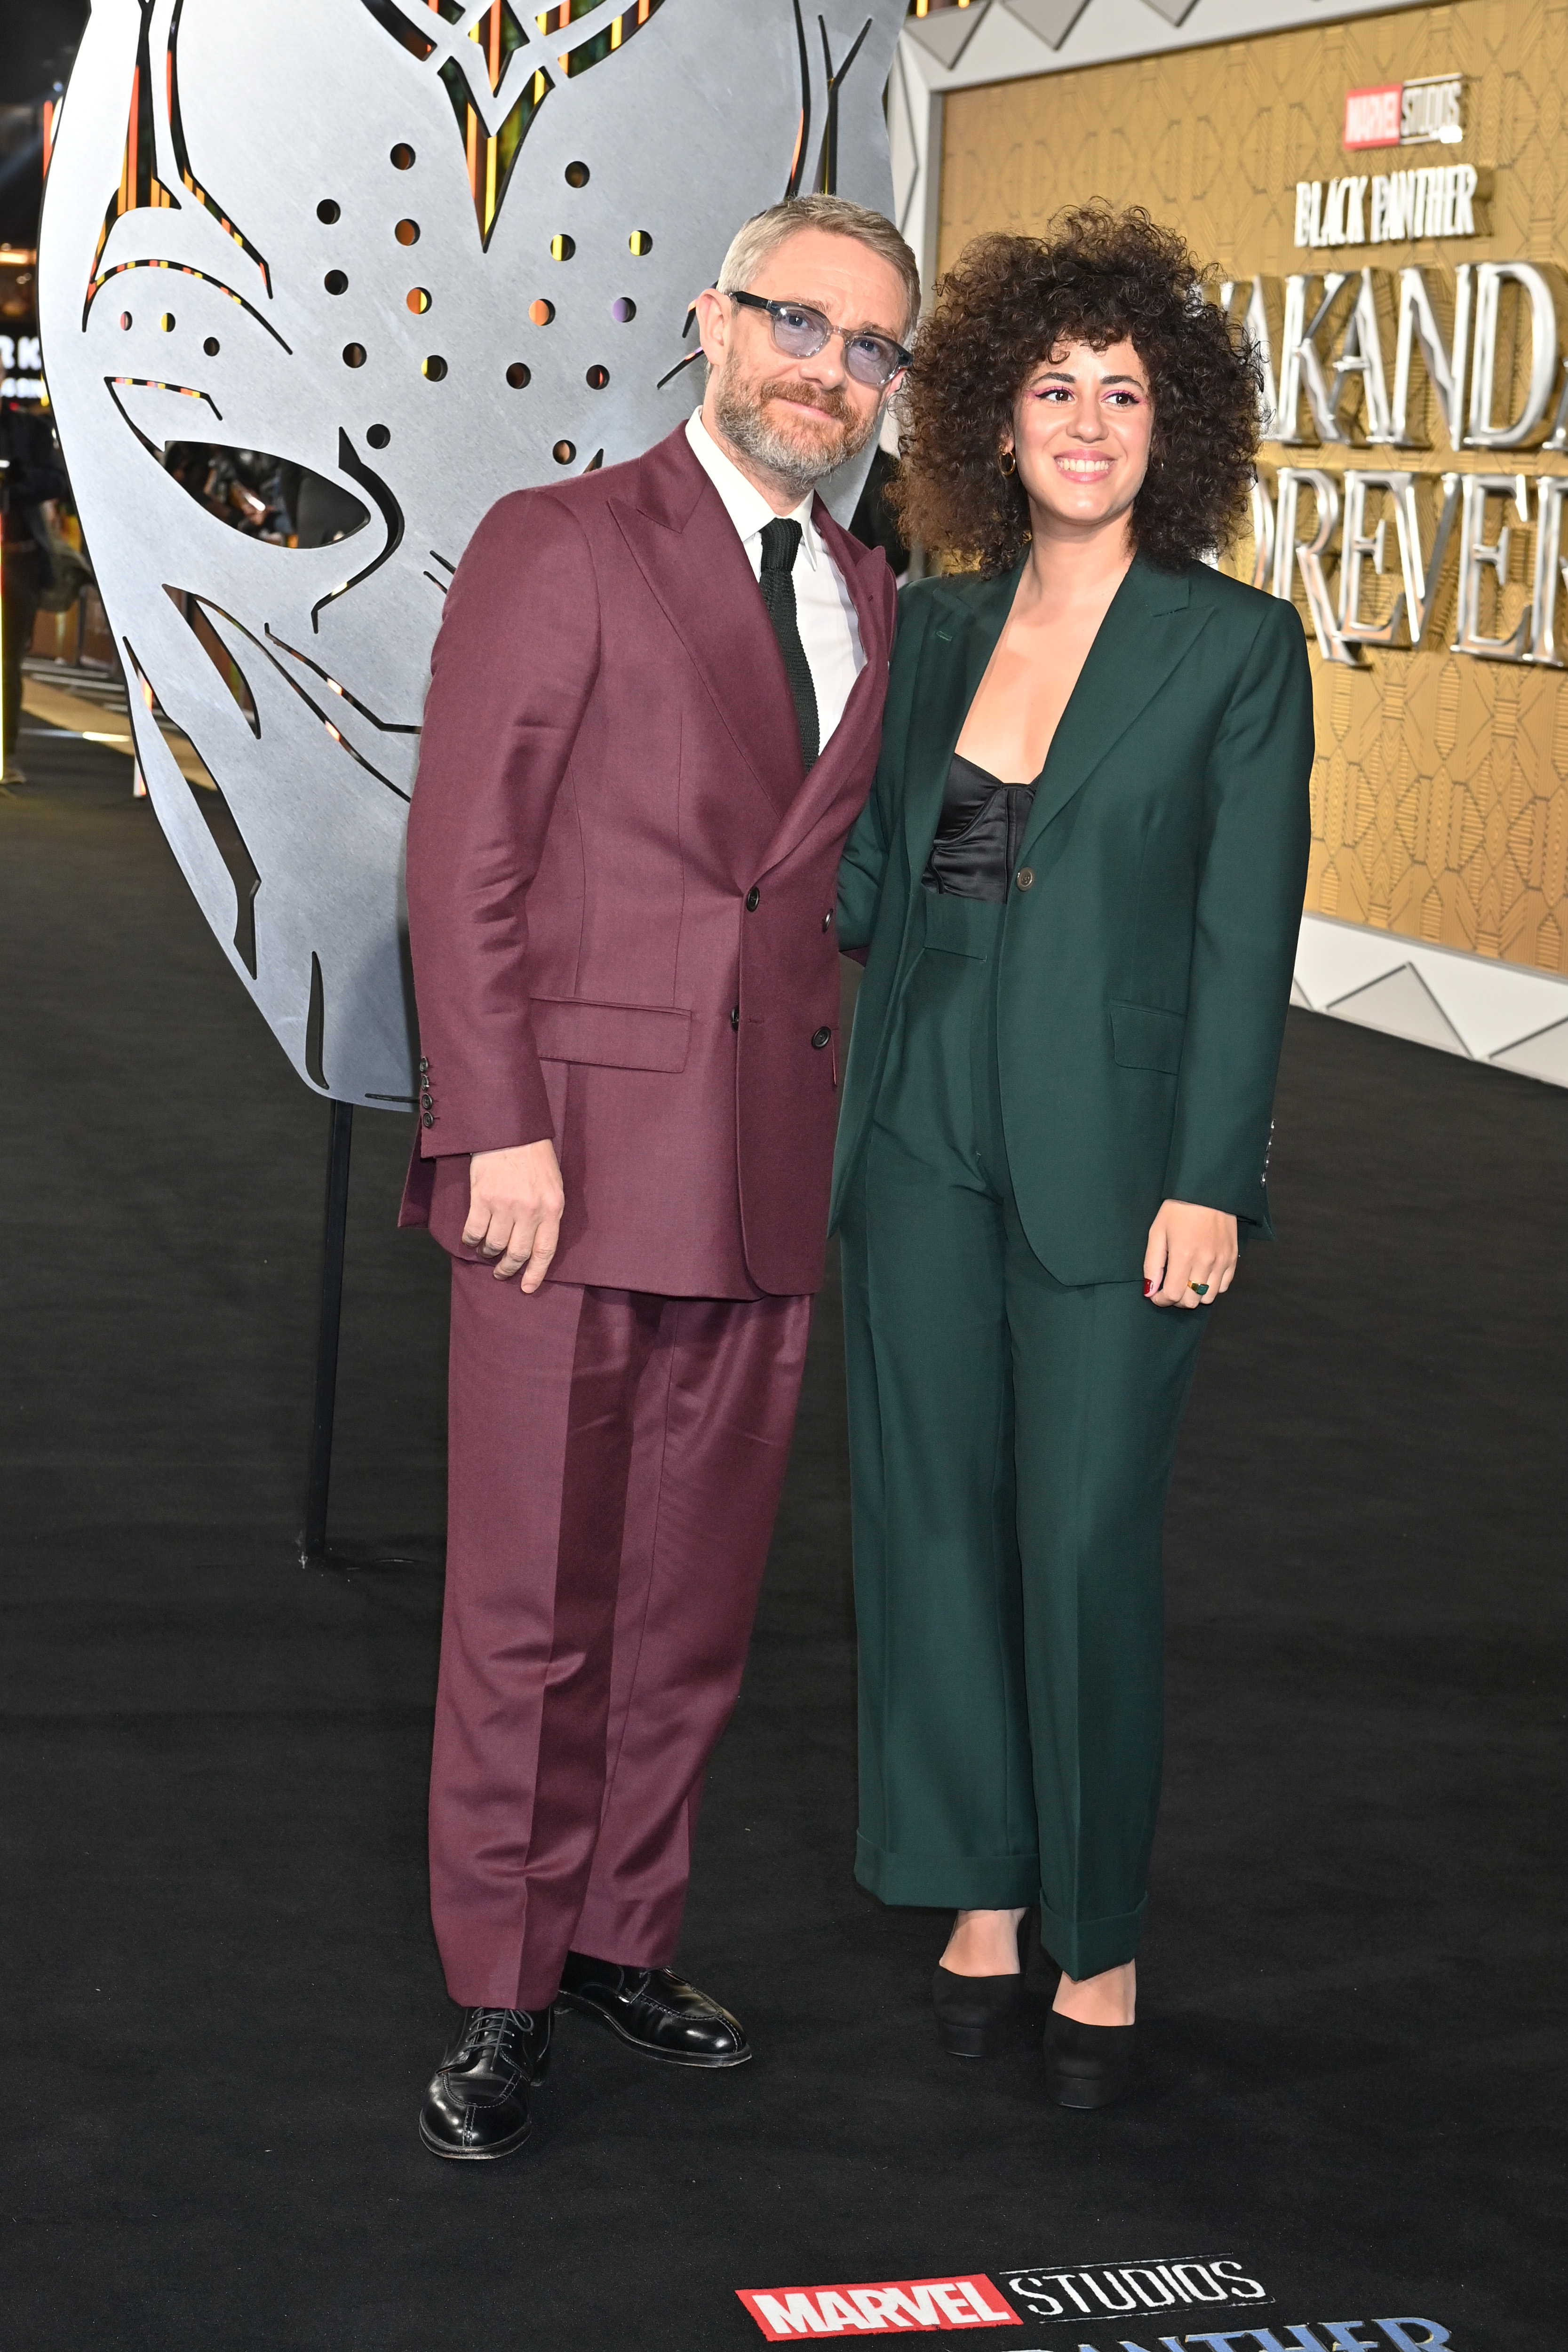 Martin Freeman and Rachel Mariam ar photographed at the European Premiere of "Black Panther: Wakanda Forever" at Cineworld Leicester Square on November 3, 2022, in London, England | Source: Getty Images